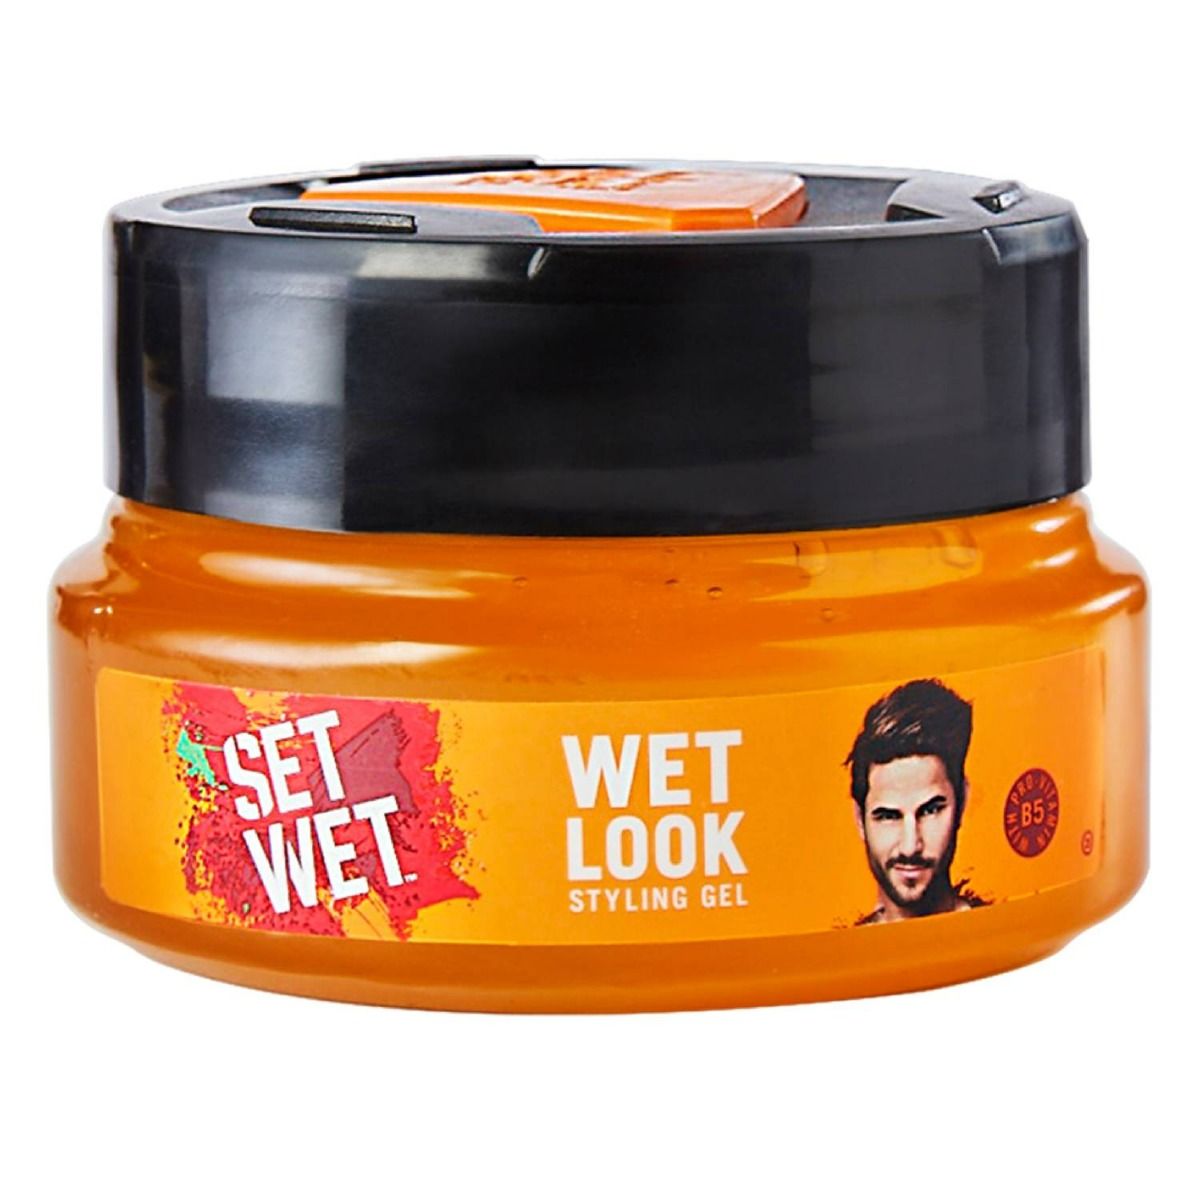 Set Wet Styling Hair Gel, 250 ml Price, Uses, Side Effects, Composition -  Apollo Pharmacy